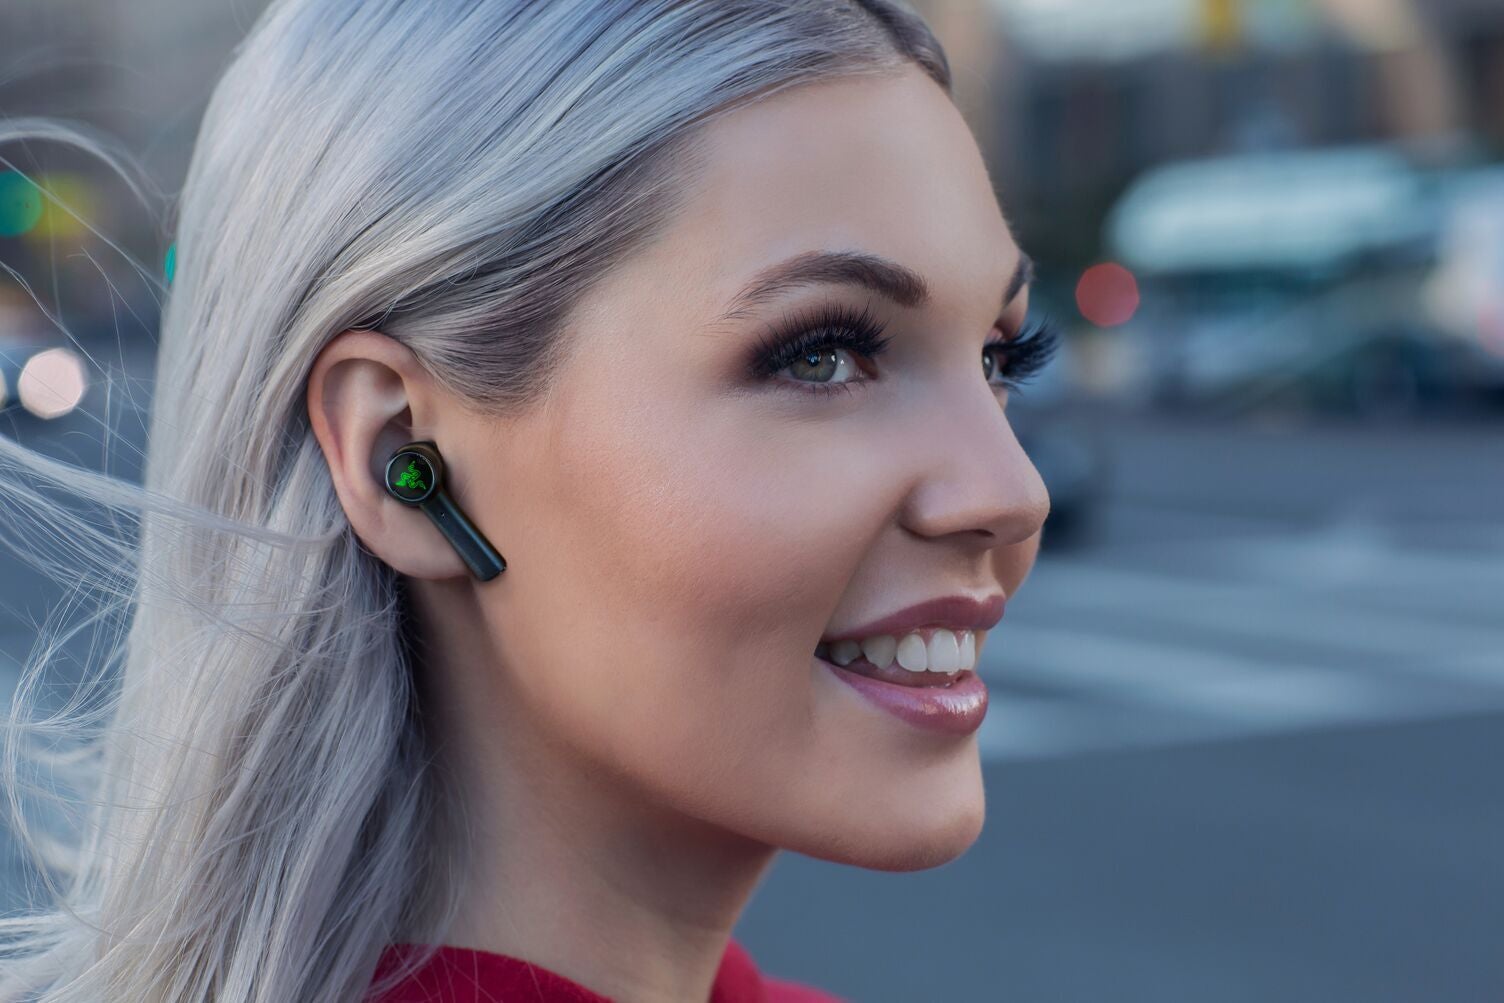 Razer has the black AirPods you wanted, and a modular controller to hit back at ROG Phone